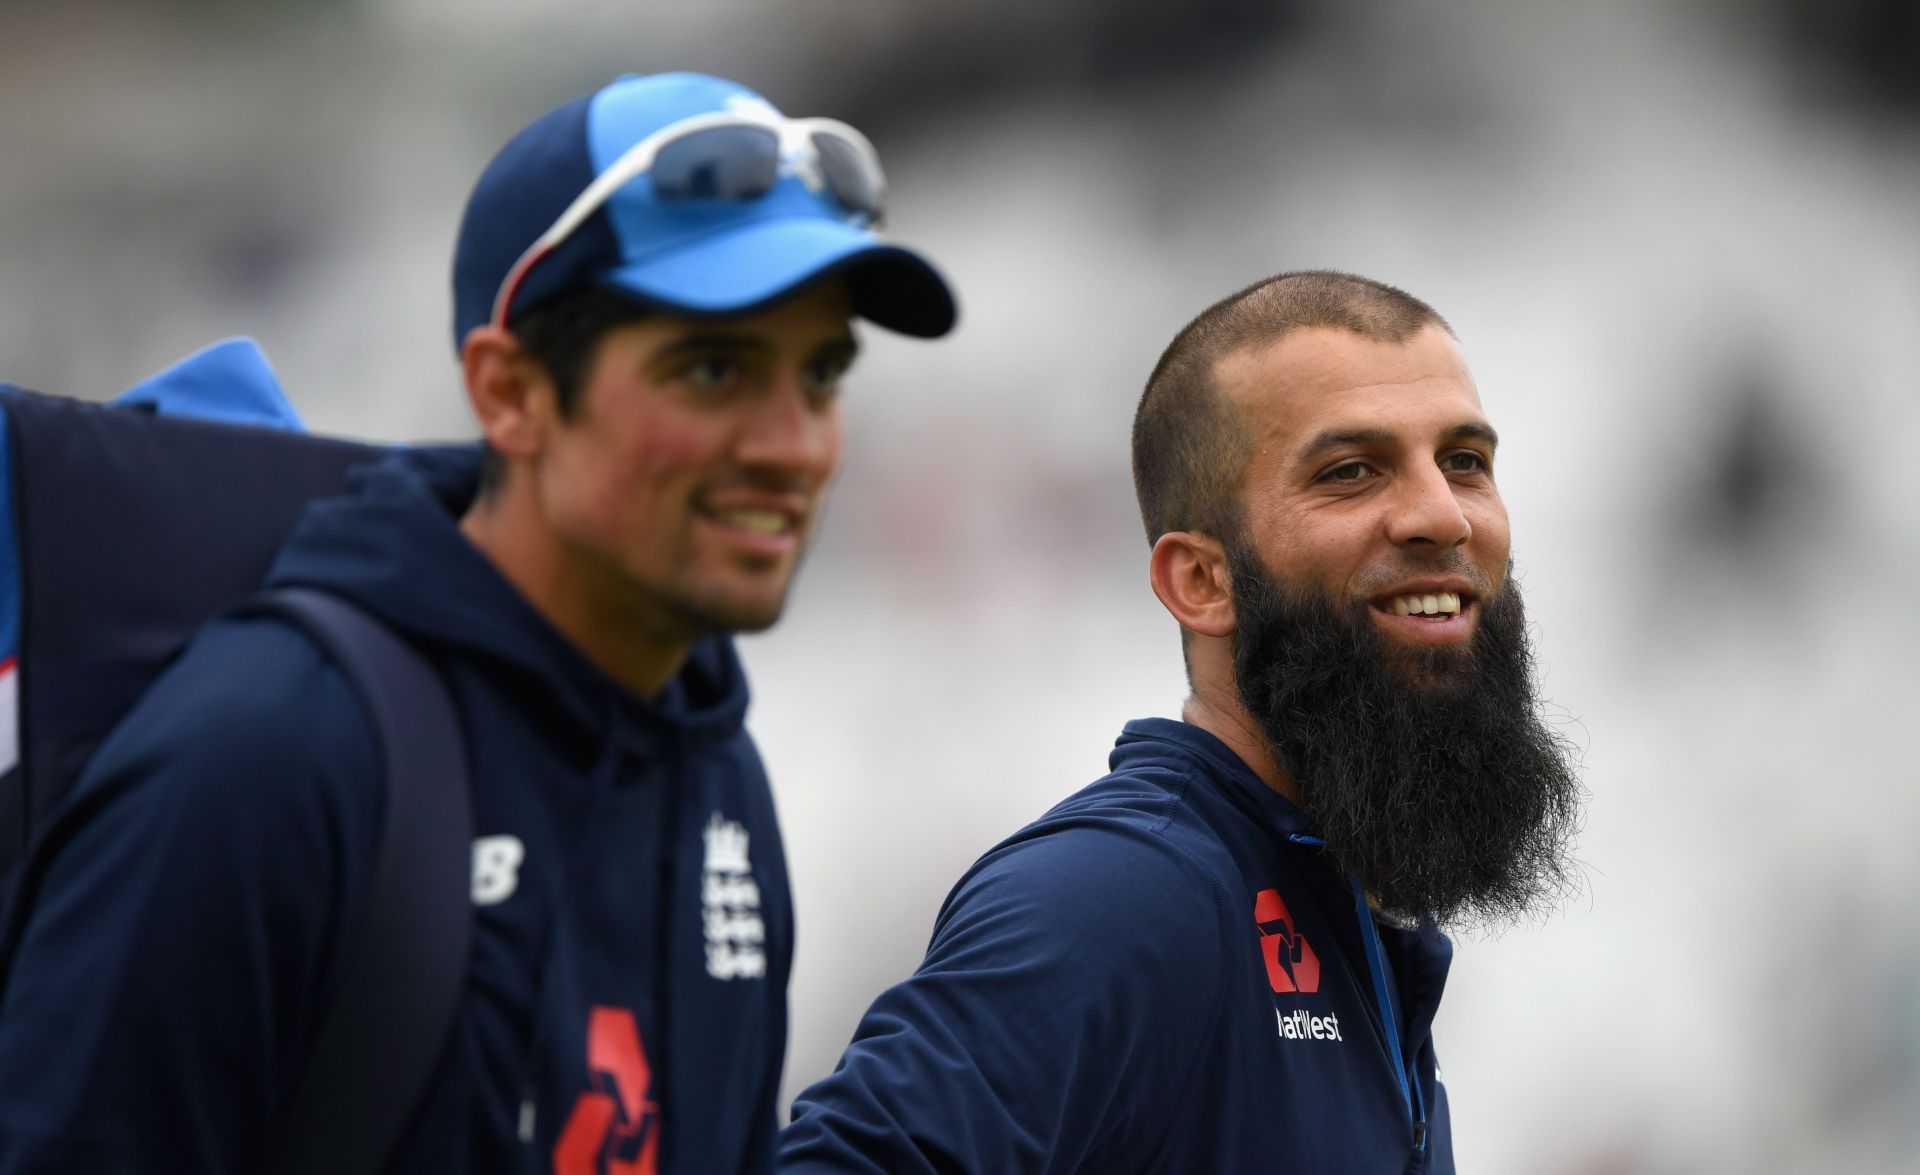 England all-rounder Moeen Ali openly criticised Alastair Cook on-air. (Credit: Getty Images)